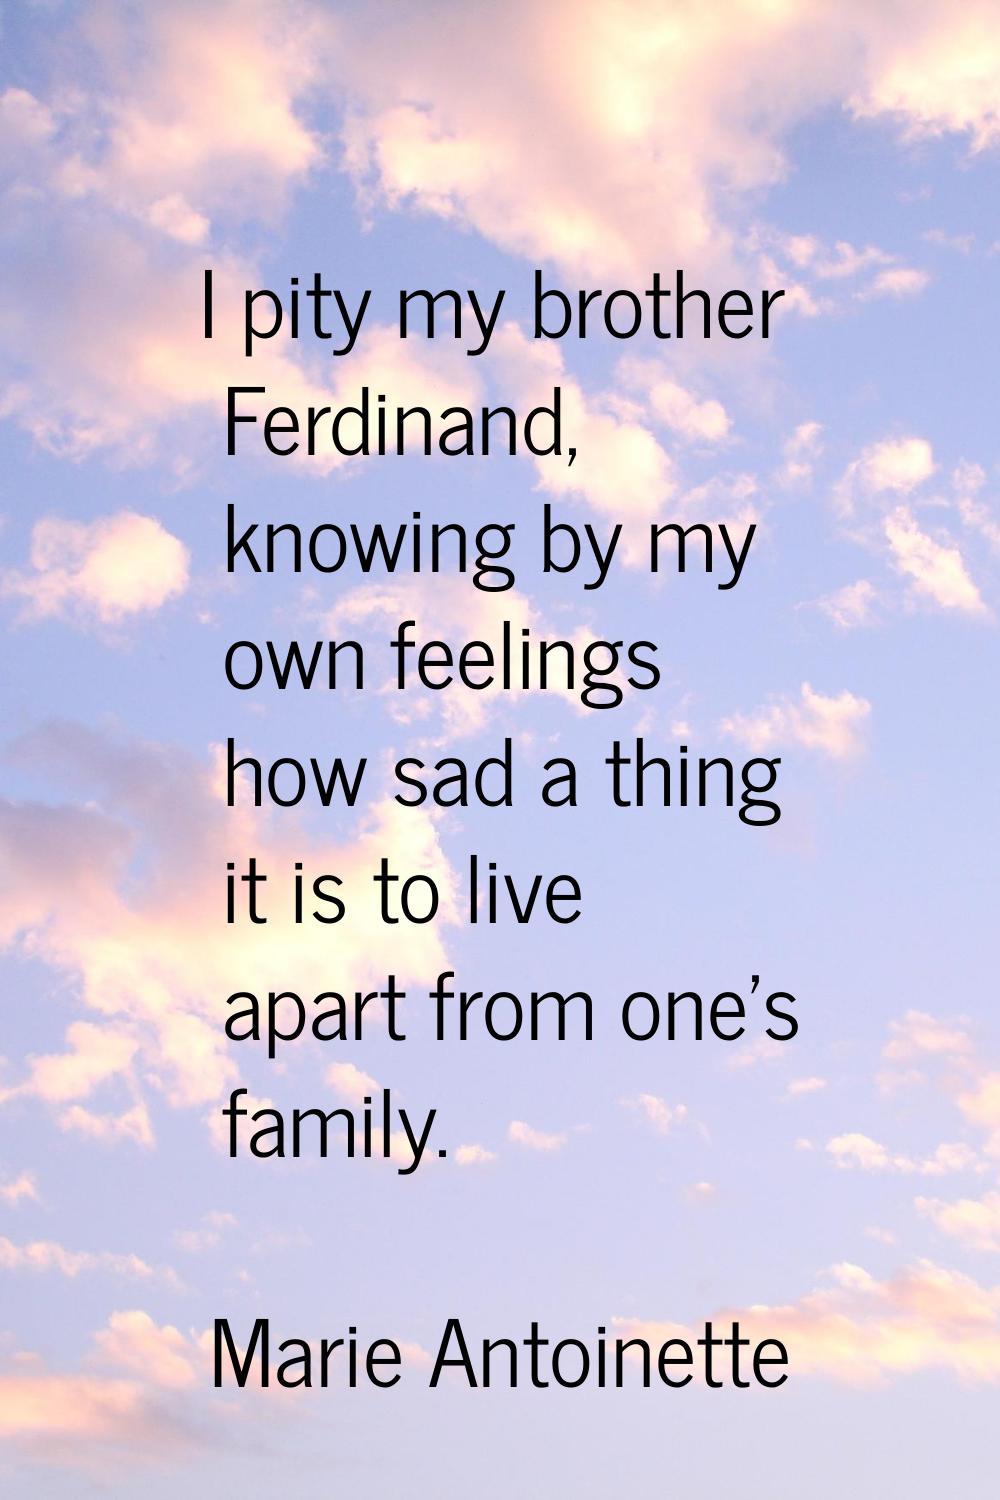 I pity my brother Ferdinand, knowing by my own feelings how sad a thing it is to live apart from on